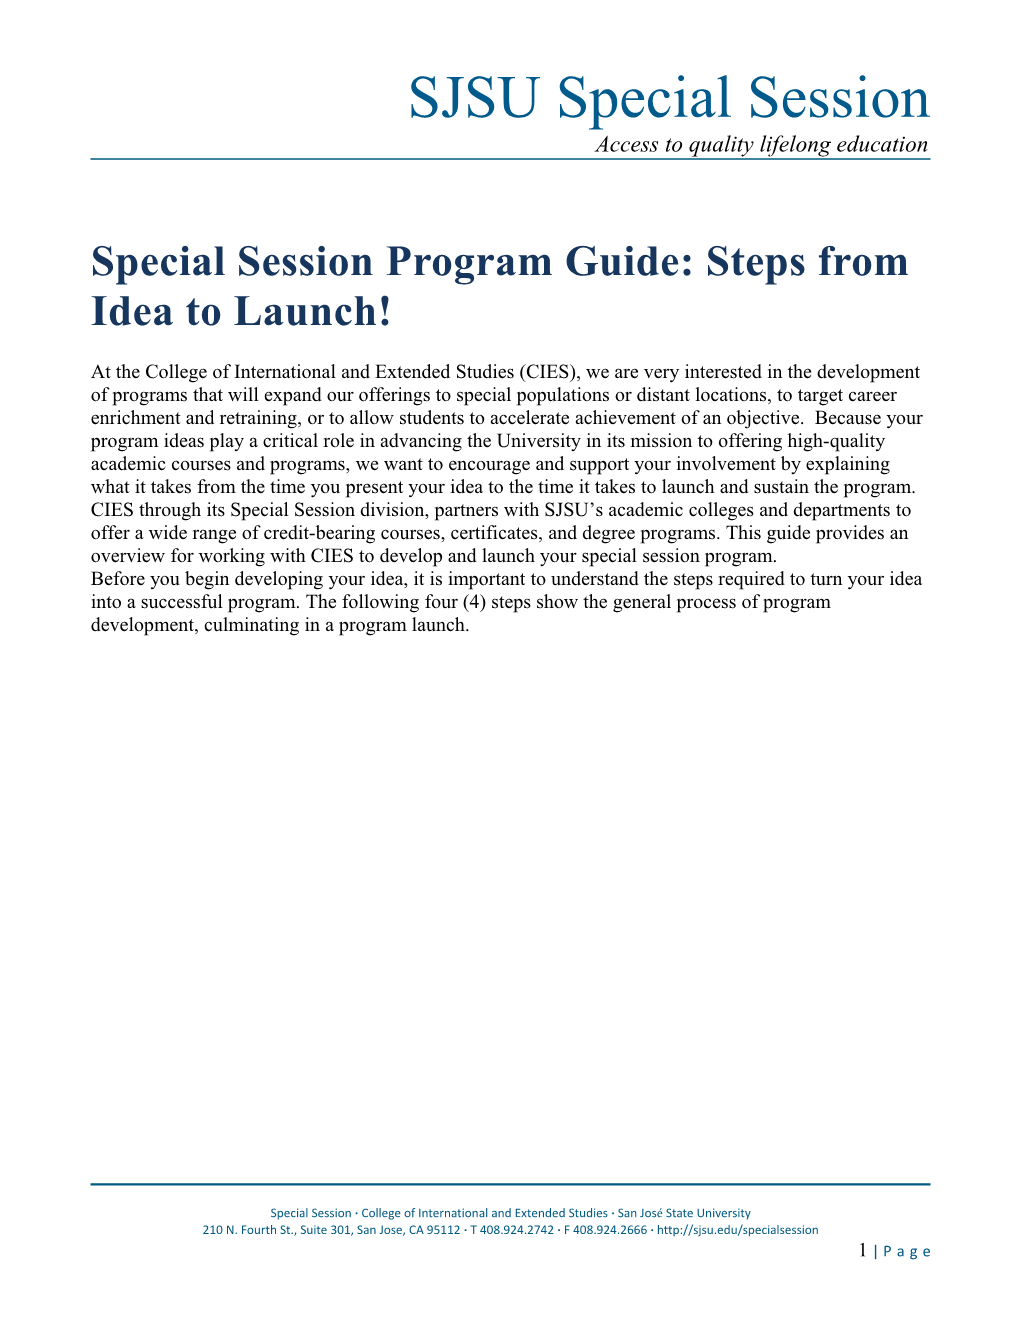 Special Session Program Guide: Steps from Idea to Launch!